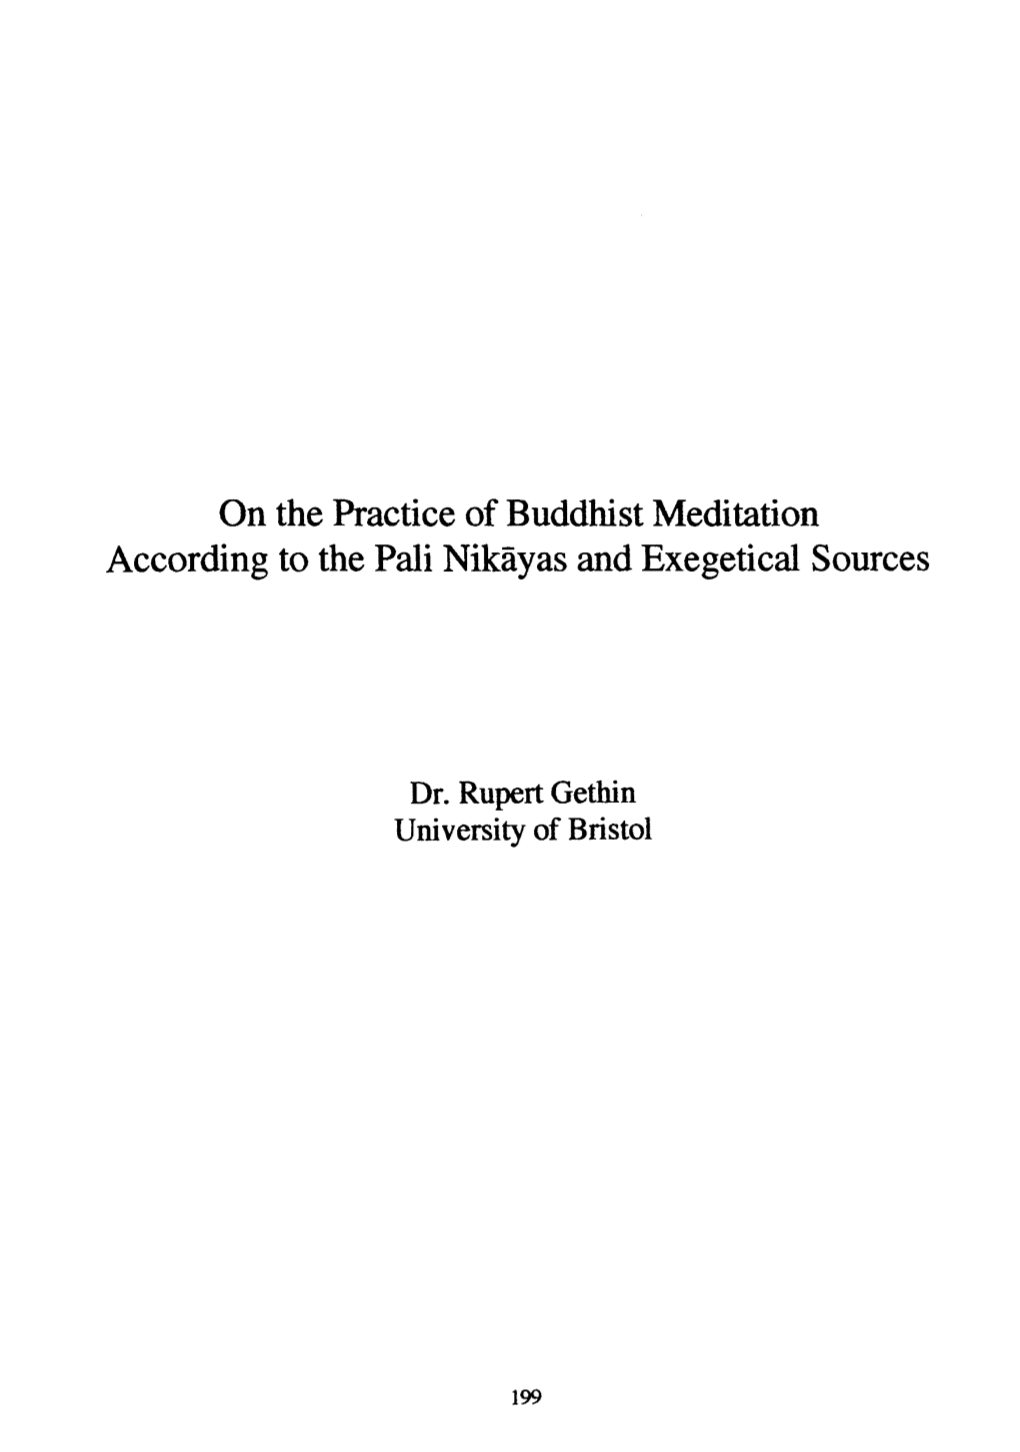 On the Practice of Buddhist Meditation According to the Pali Nikayas and Exegetical Sources